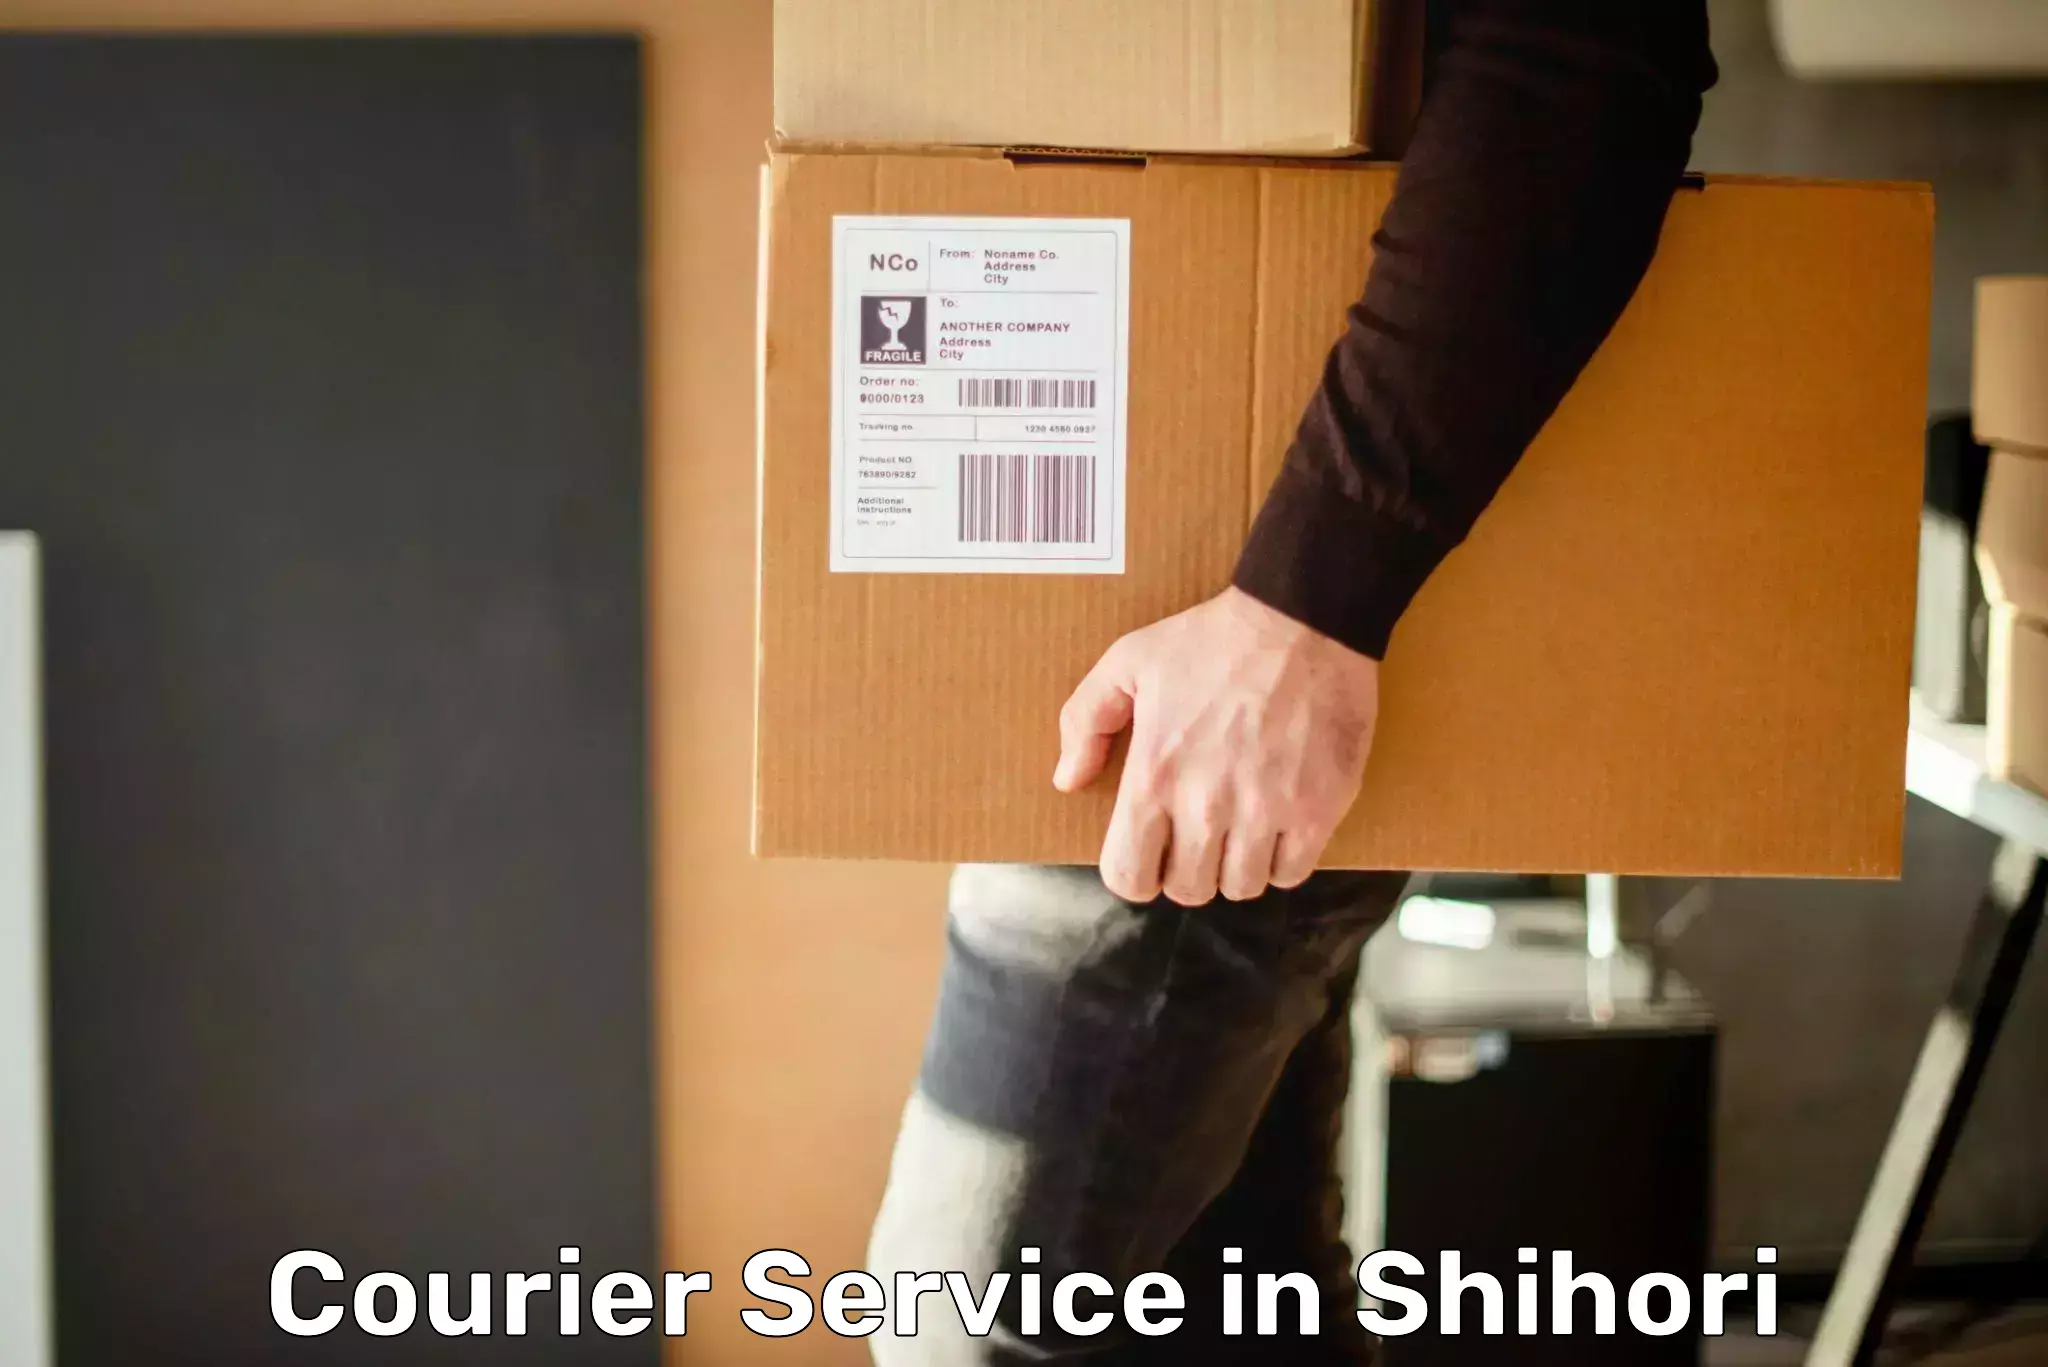 Scheduled delivery in Shihori